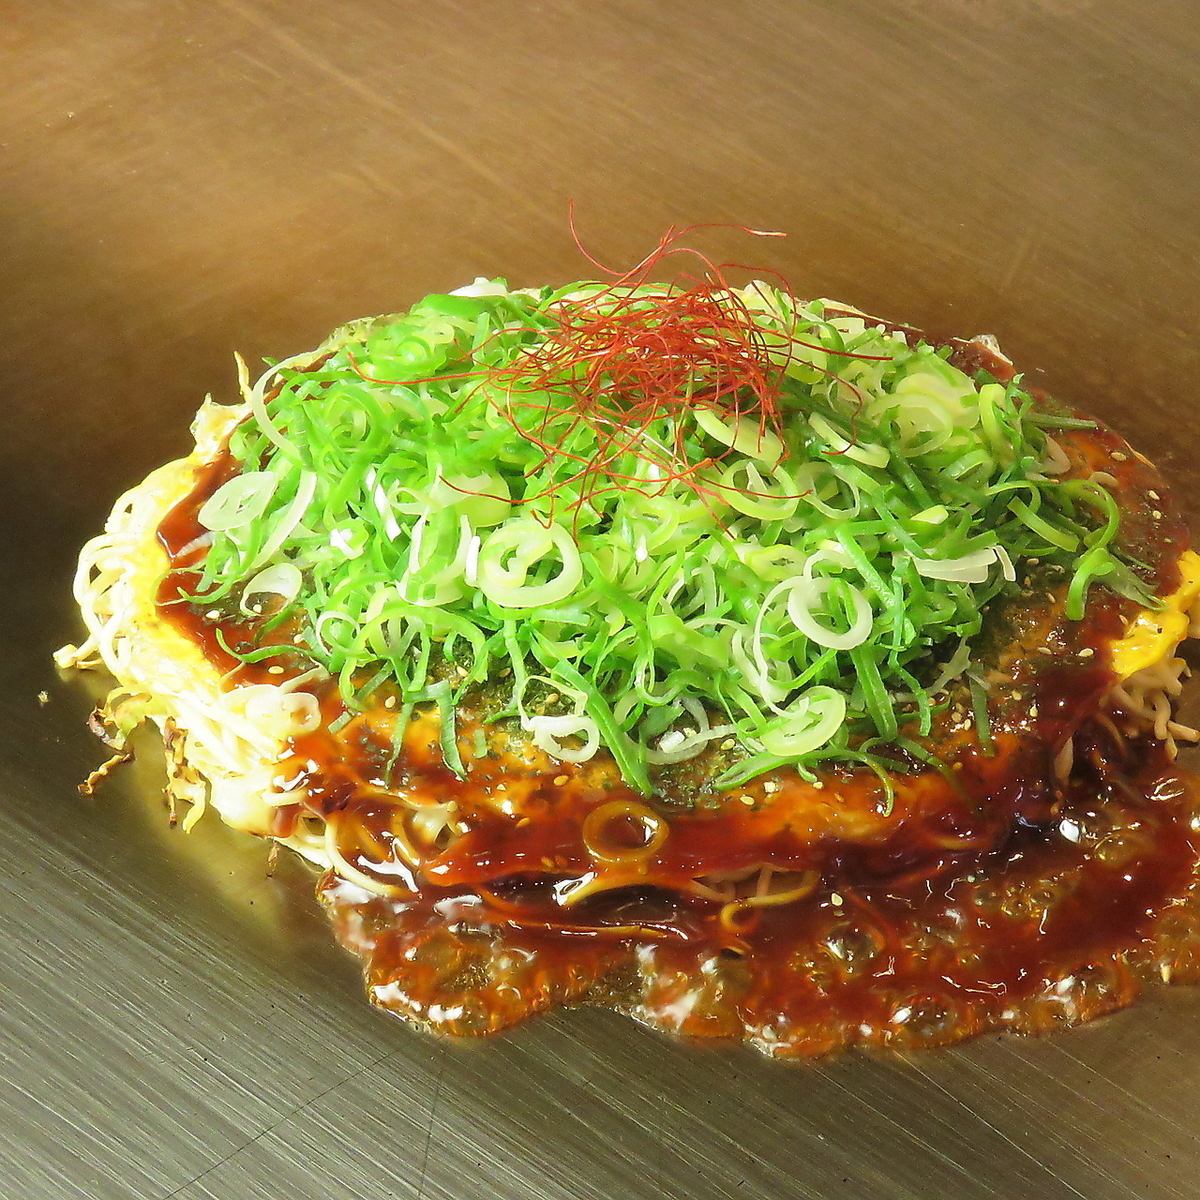 Please enjoy our specialty okonomiyaki on the iron plate in front of you♪